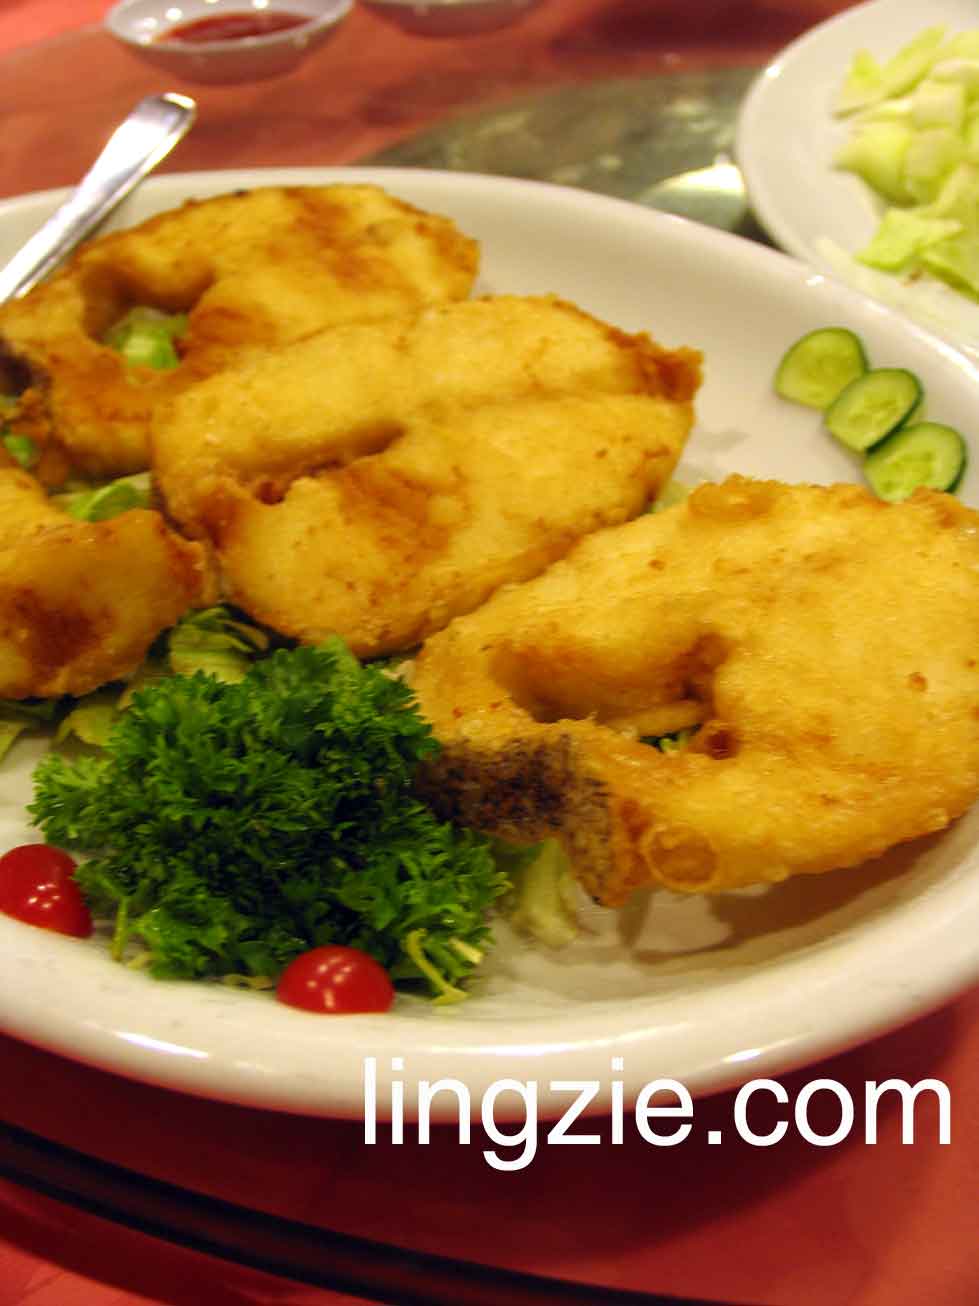 Starview - Fried Cod Fish